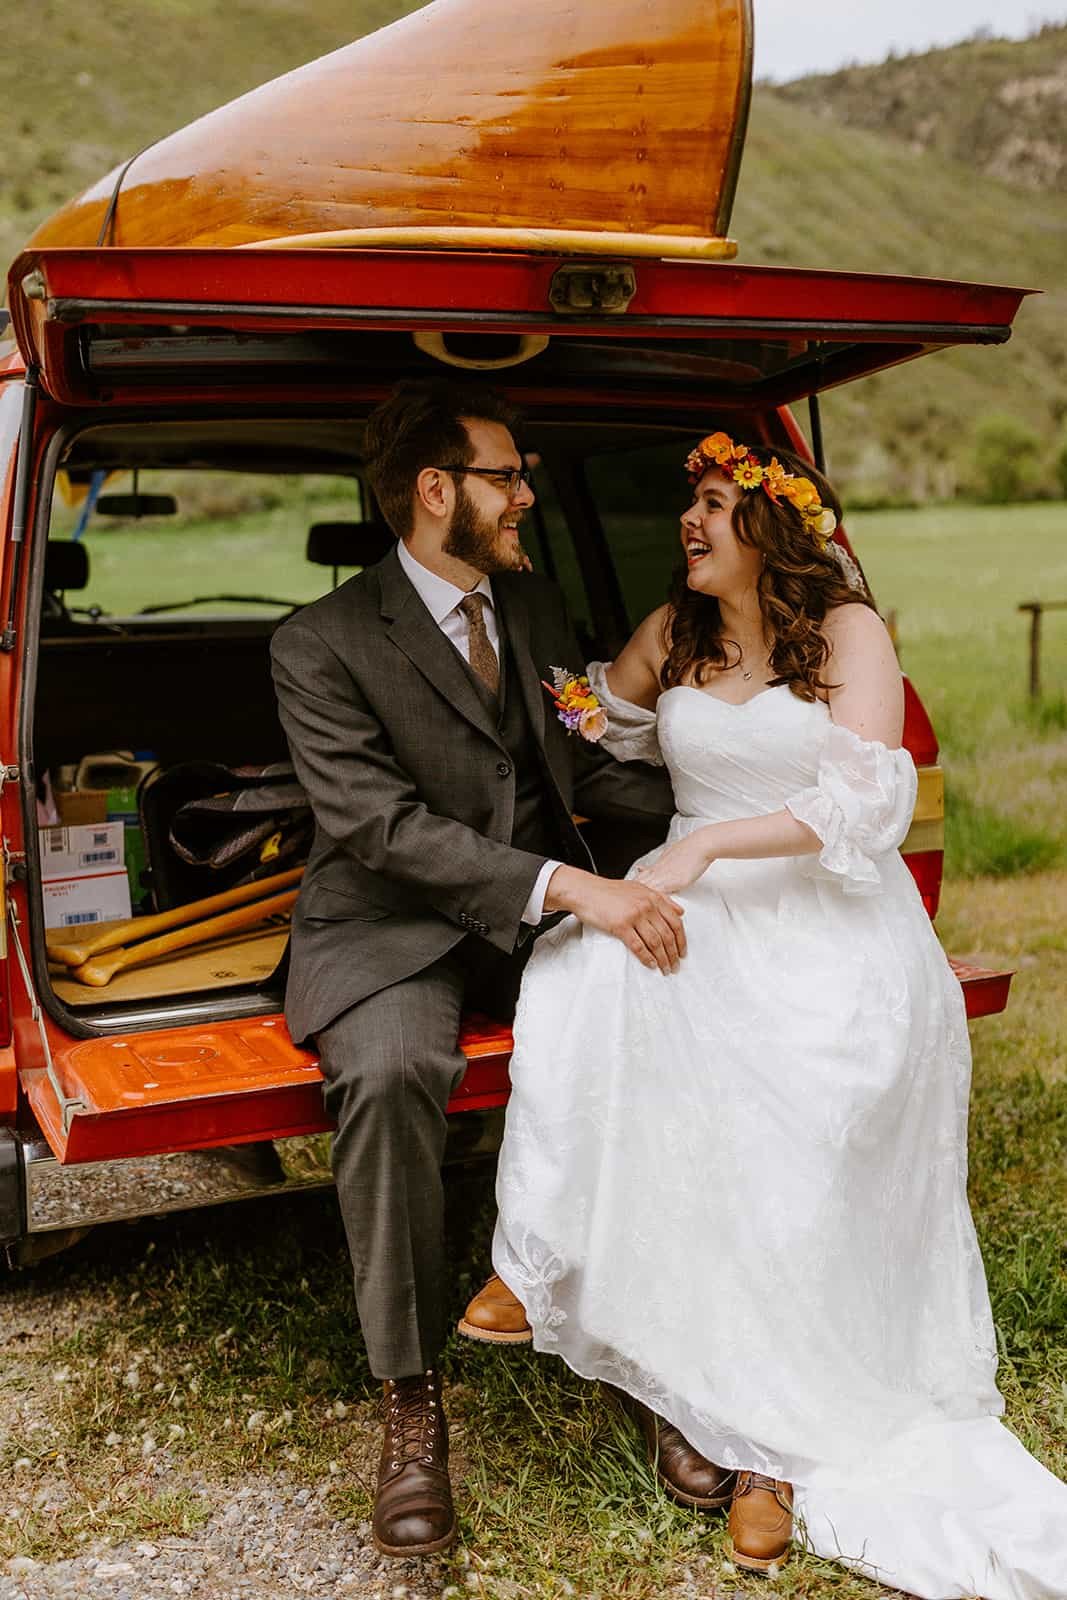 A man and woman sit on the tailgate in their wedding clothes in a red Toyota Land Cruiser